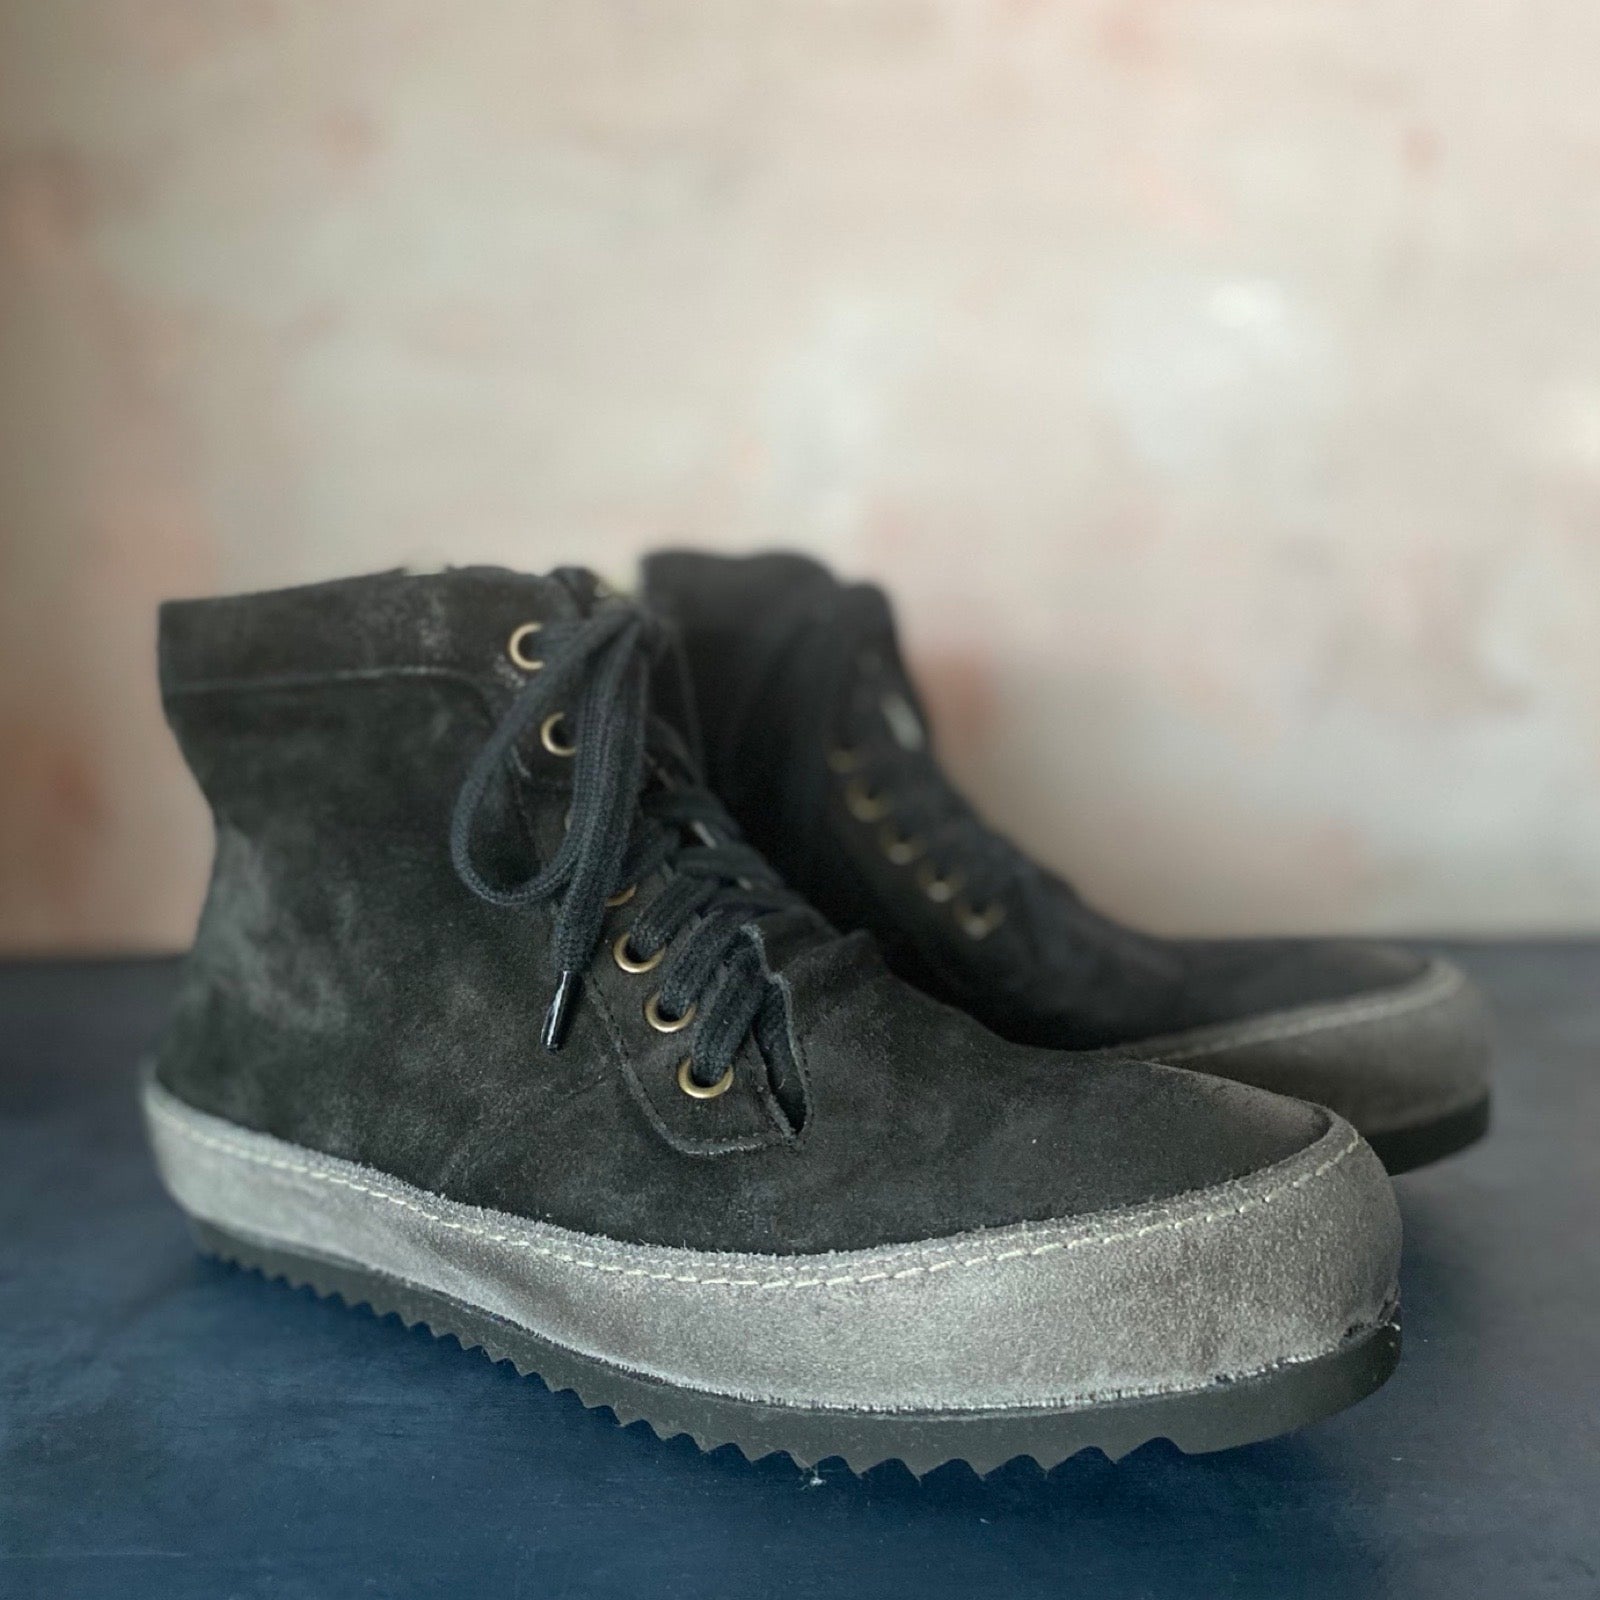 Victoria Varrasso Sportiva Two Tone Washed Soot Suede Hightops